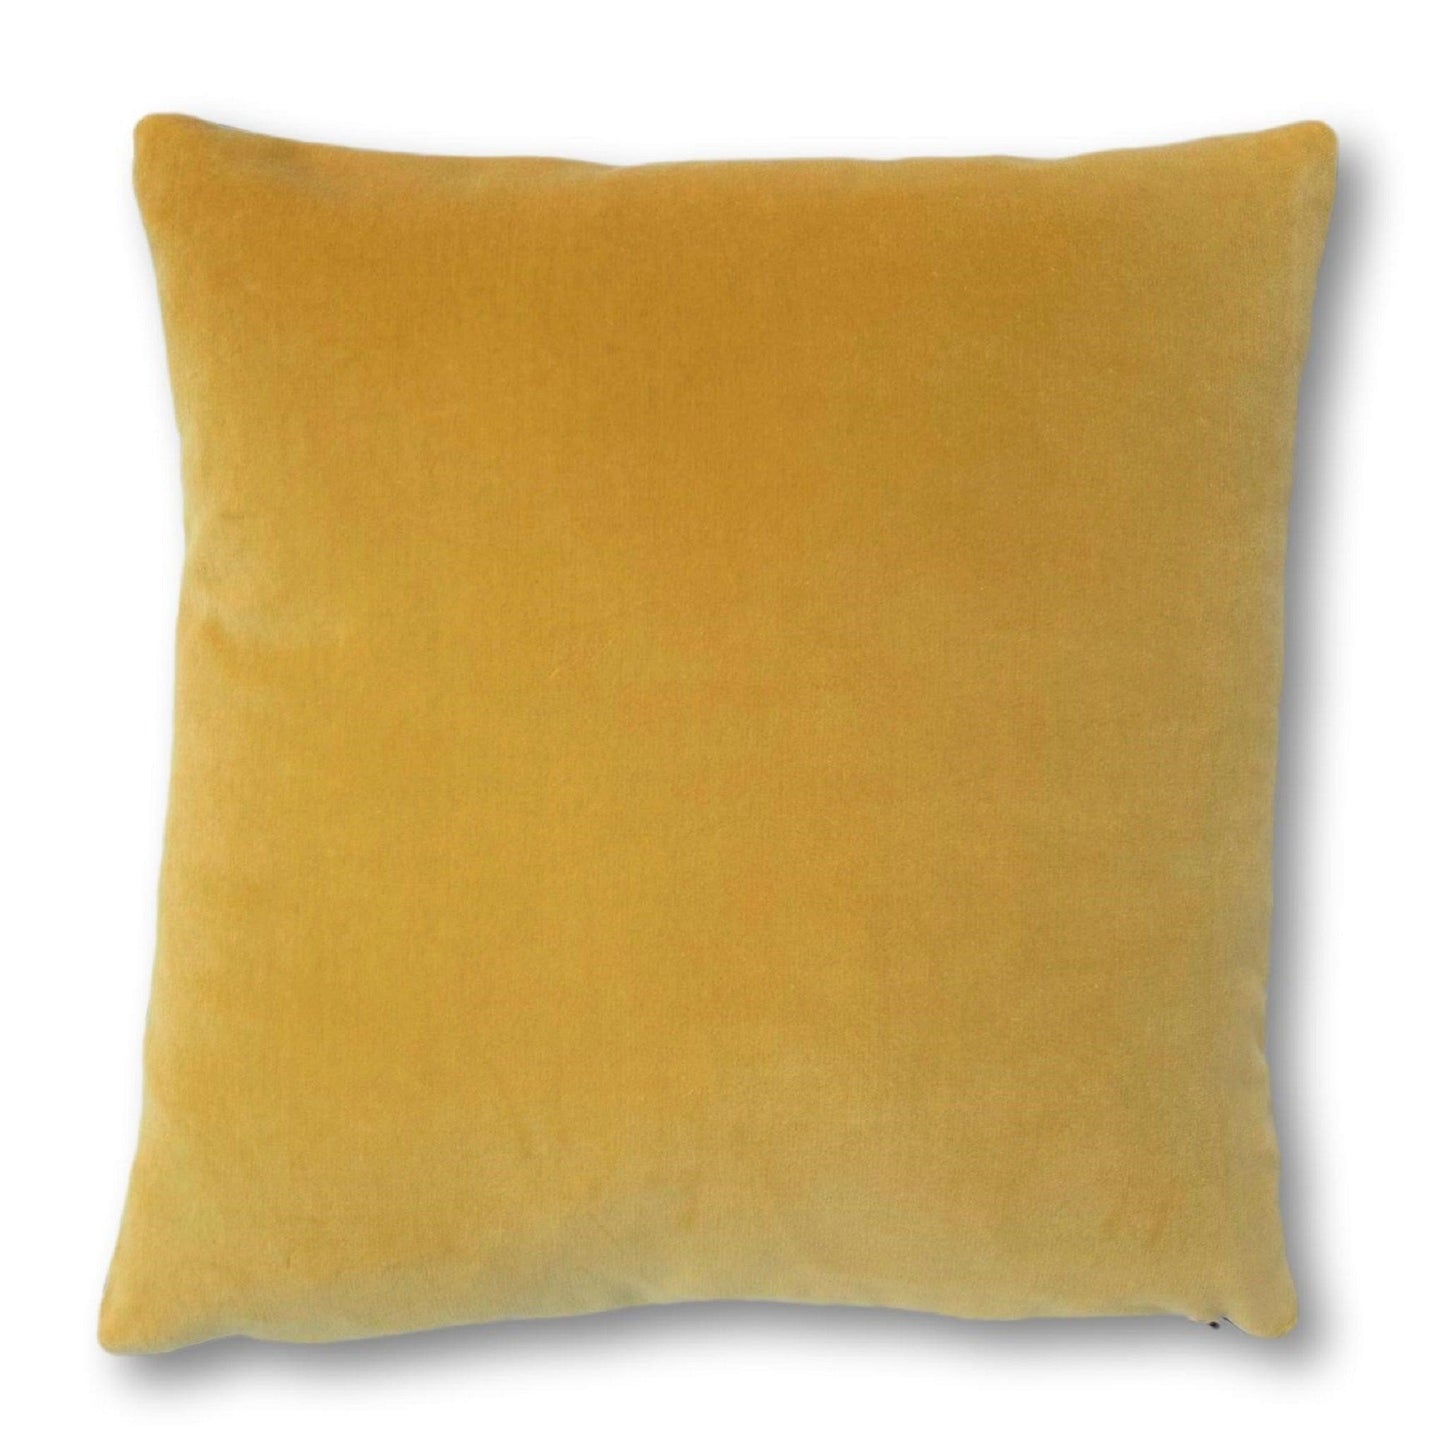 pink and yellow cushion luxe 39